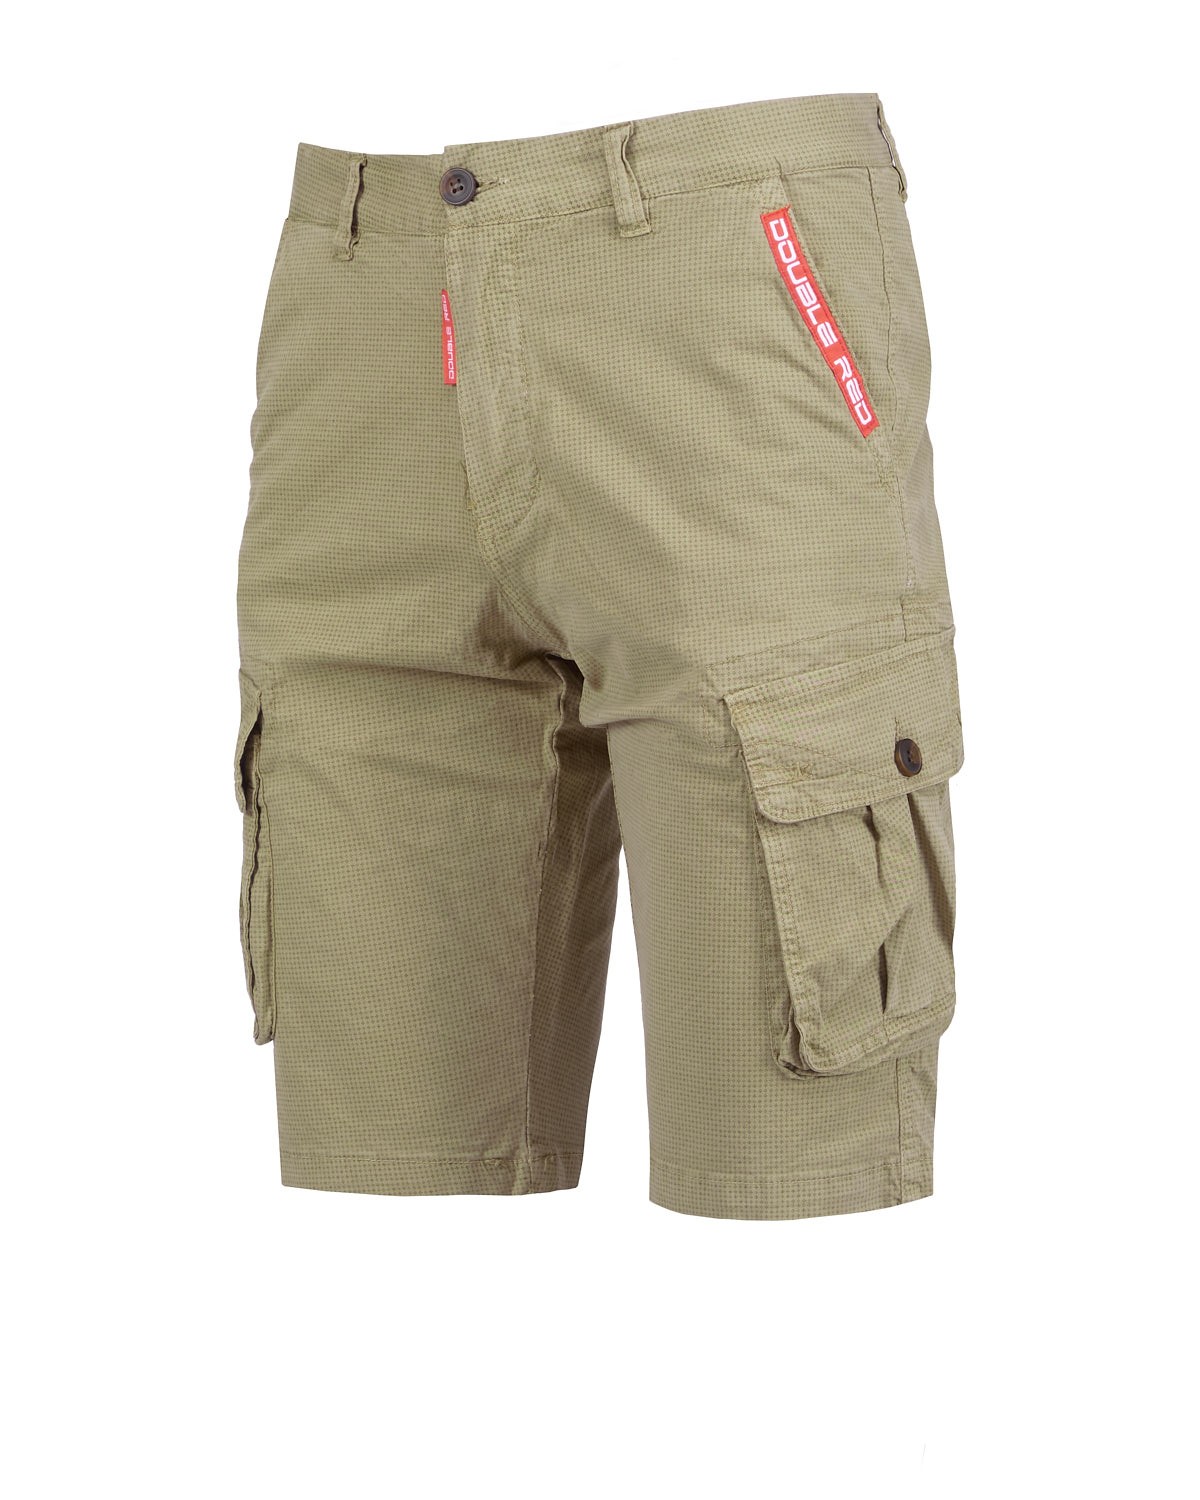 SQUERS Shorts Desert - Double Red